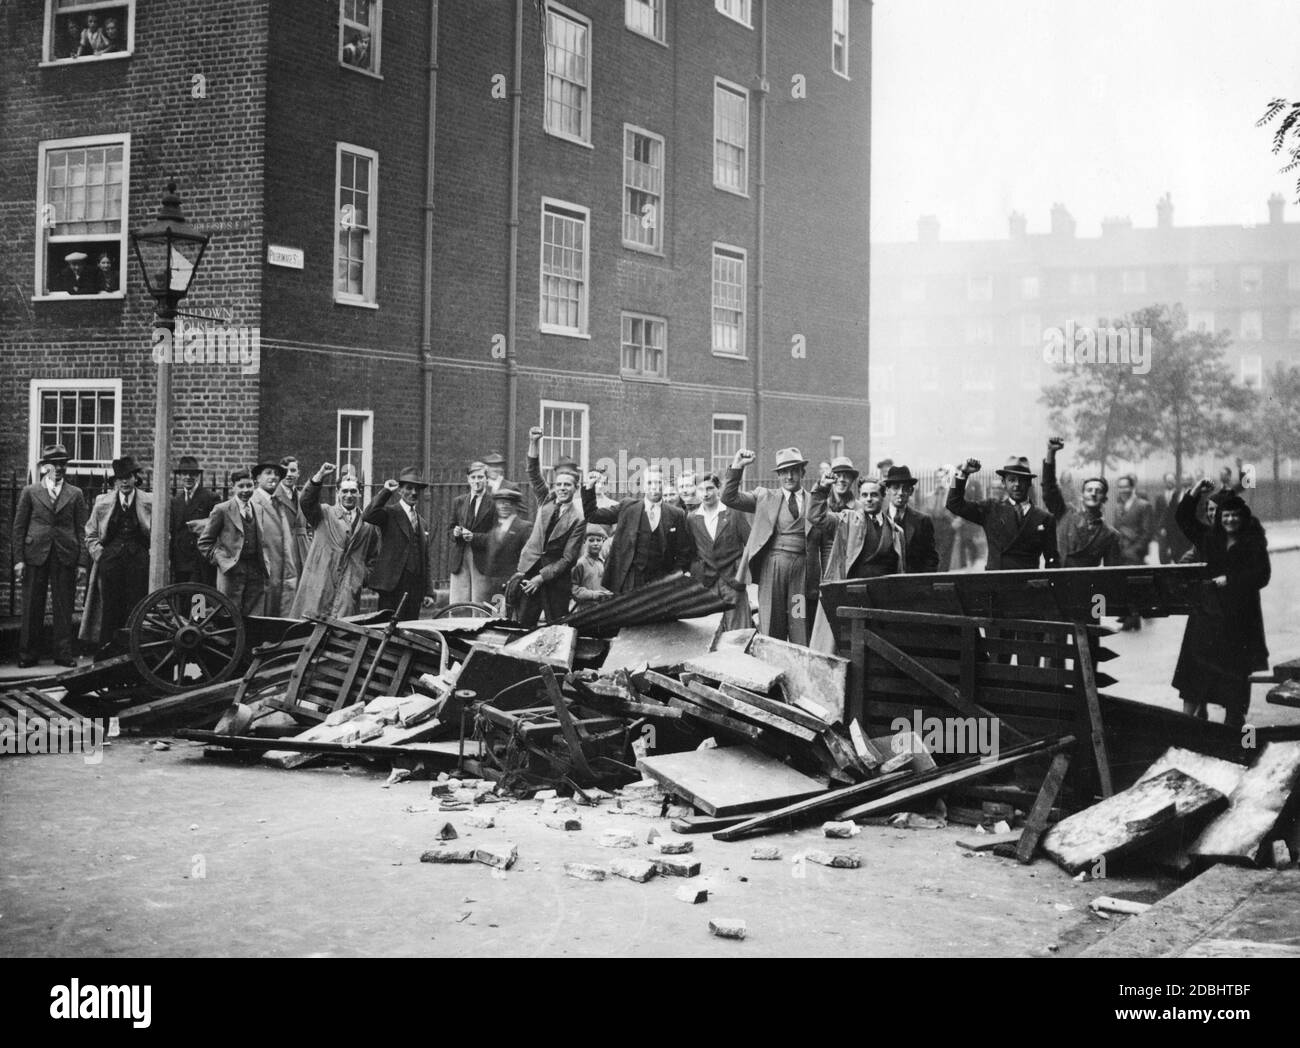 'Demonstrators have erected a barricade on Pilgrimage Street to prevent the march of the ''British Union of Fascists'' (BUF) led by Oswald Mosley through South London.' Stock Photo